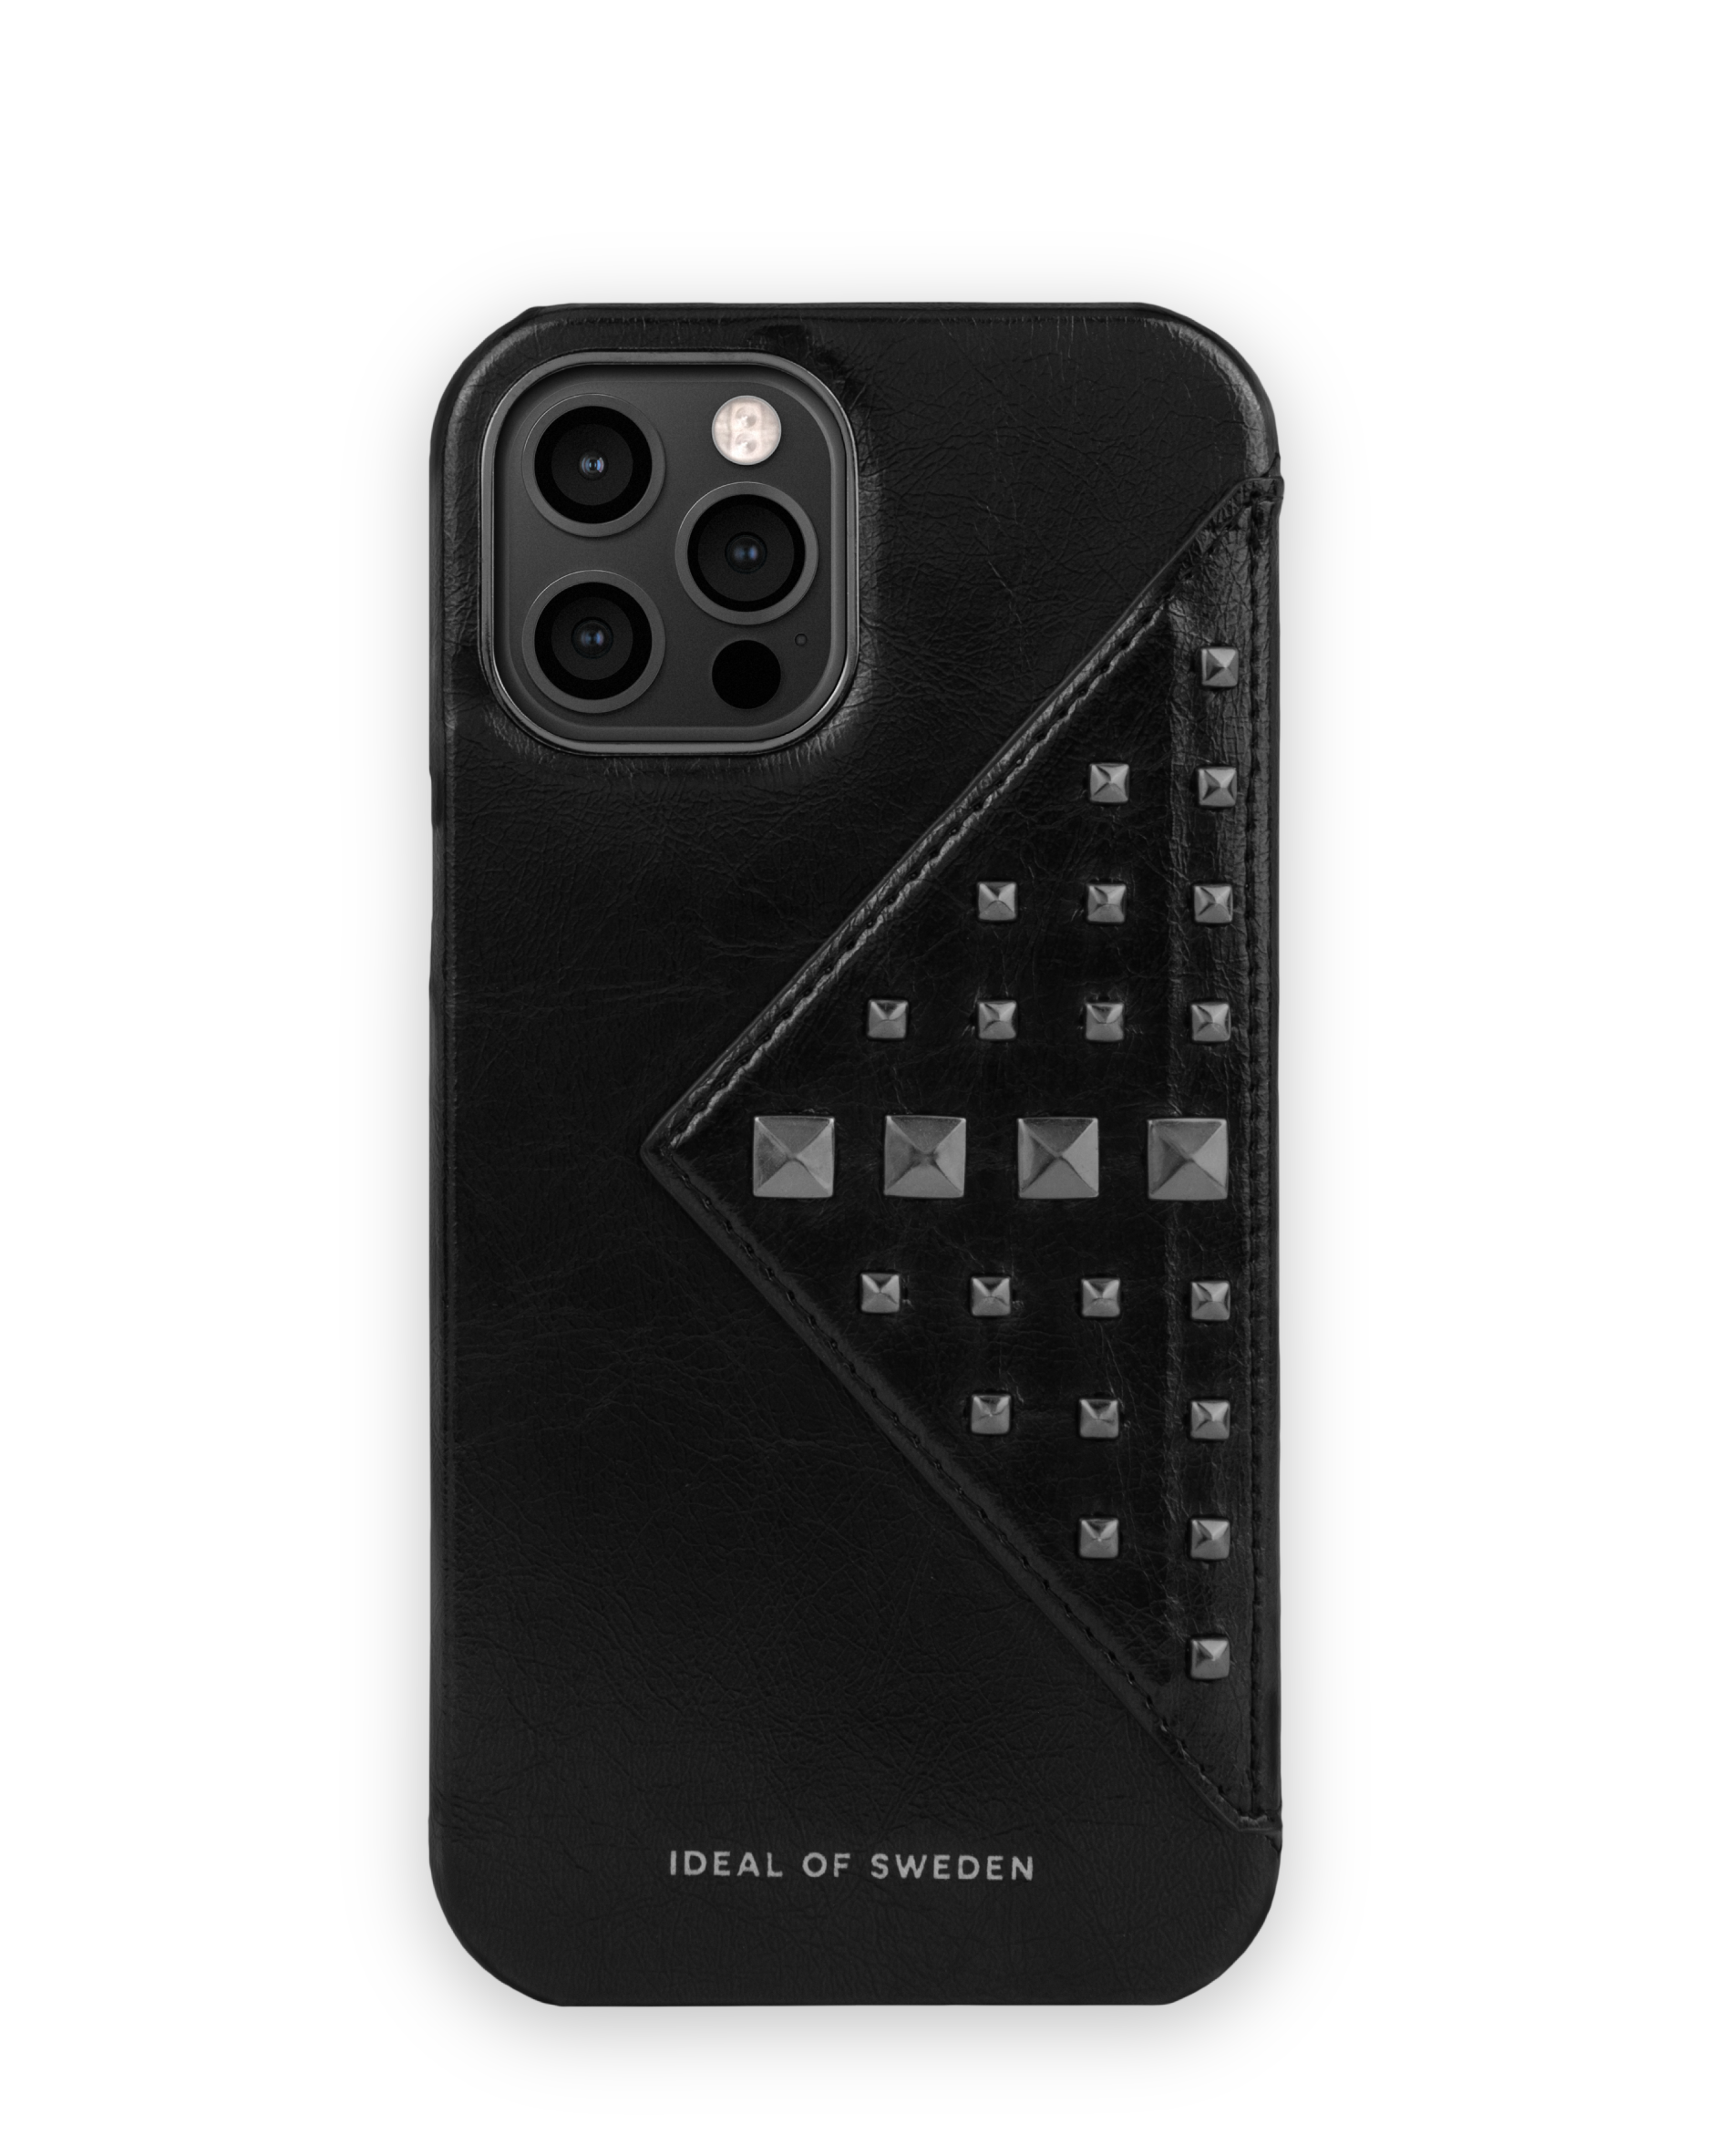 Apple, IDSCSS21-I2067, Glossy IPhone OF 12 SWEDEN Backcover, Black Pro Beatstuds IDEAL Max,